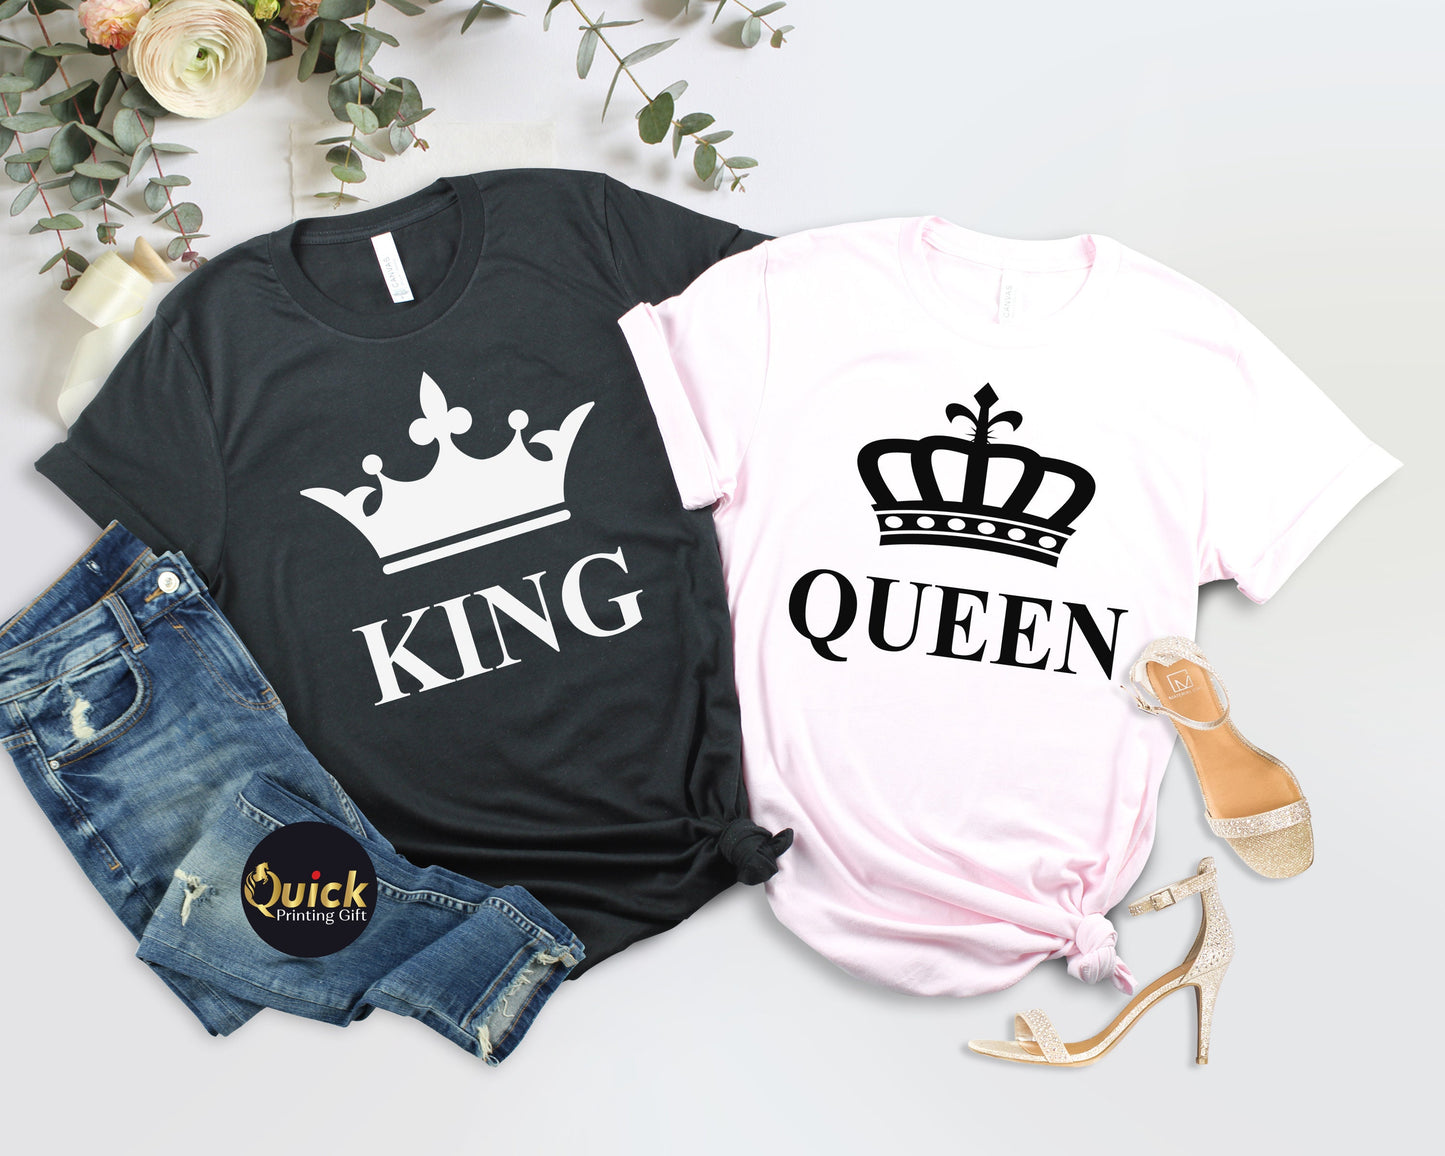 King and Queen Matching T-Shirt